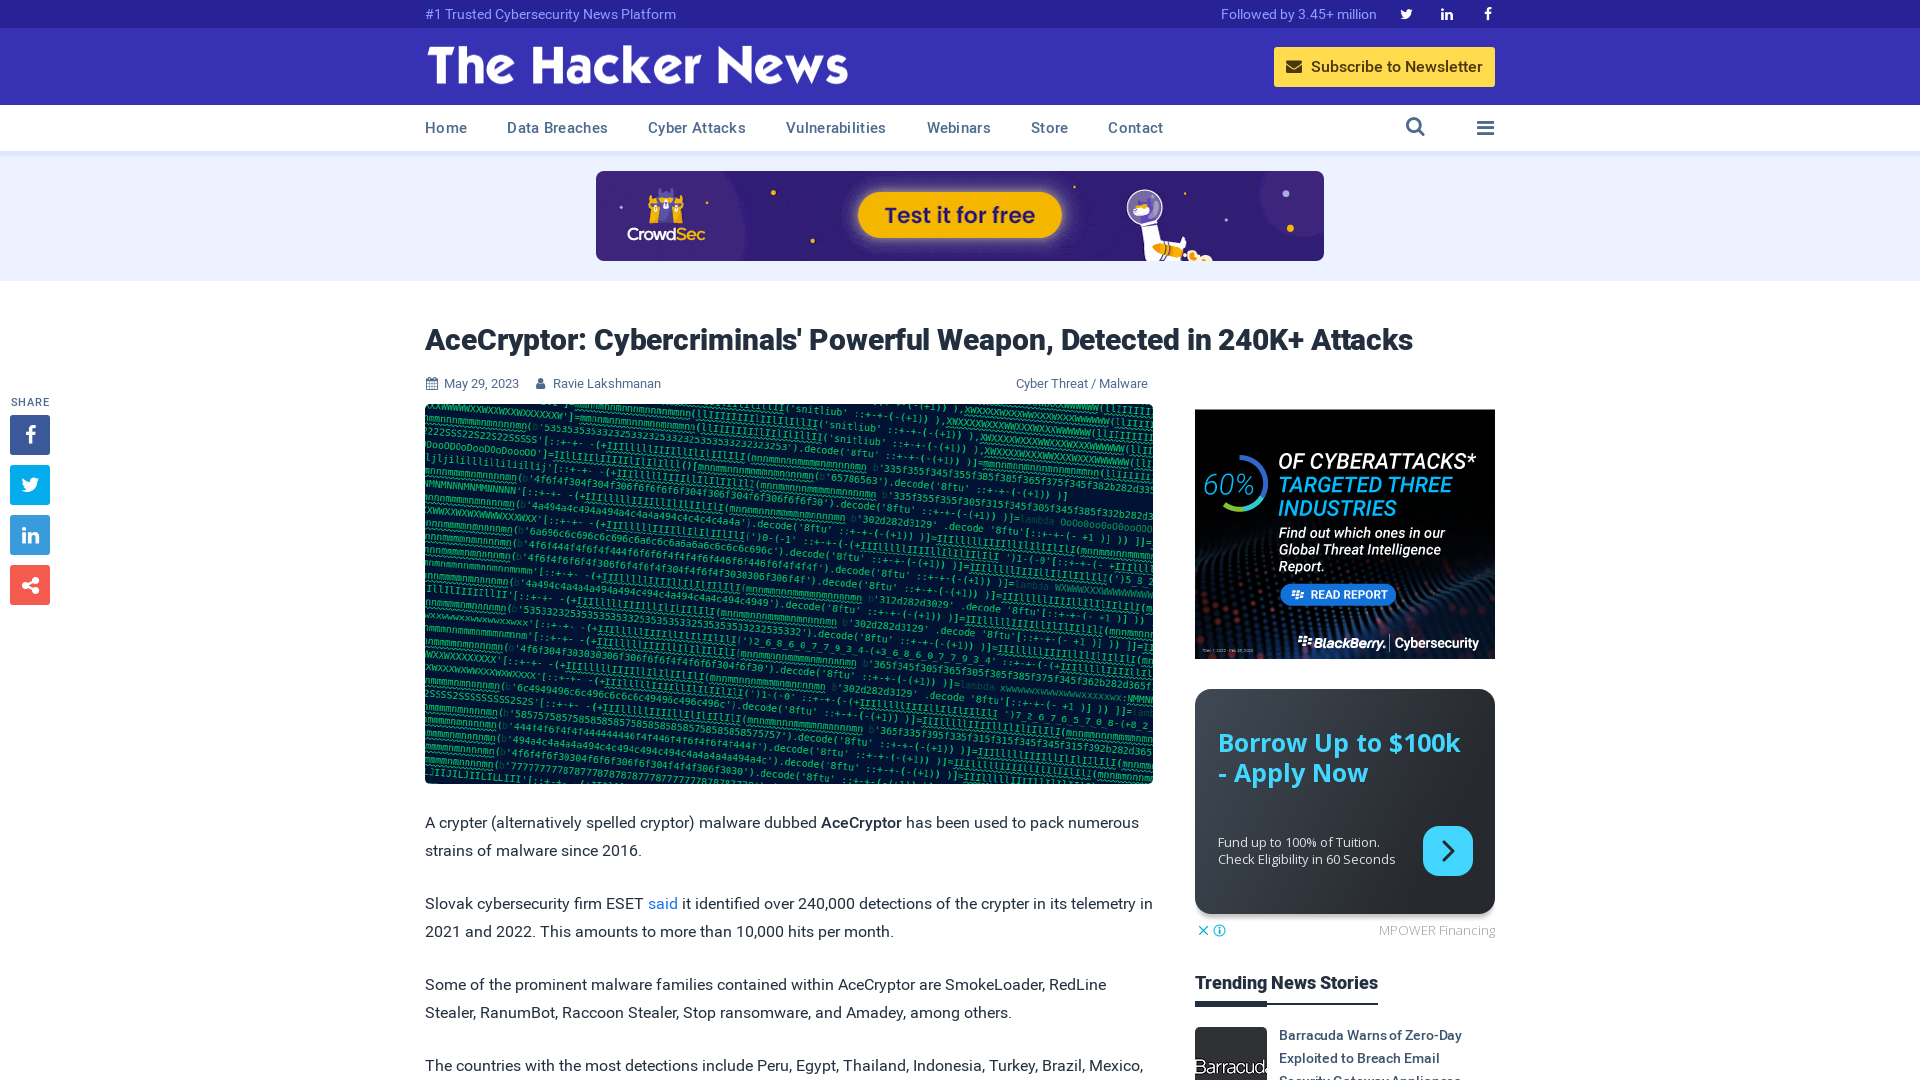 AceCryptor: Cybercriminals' Powerful Weapon, Detected in 240K+ Attacks